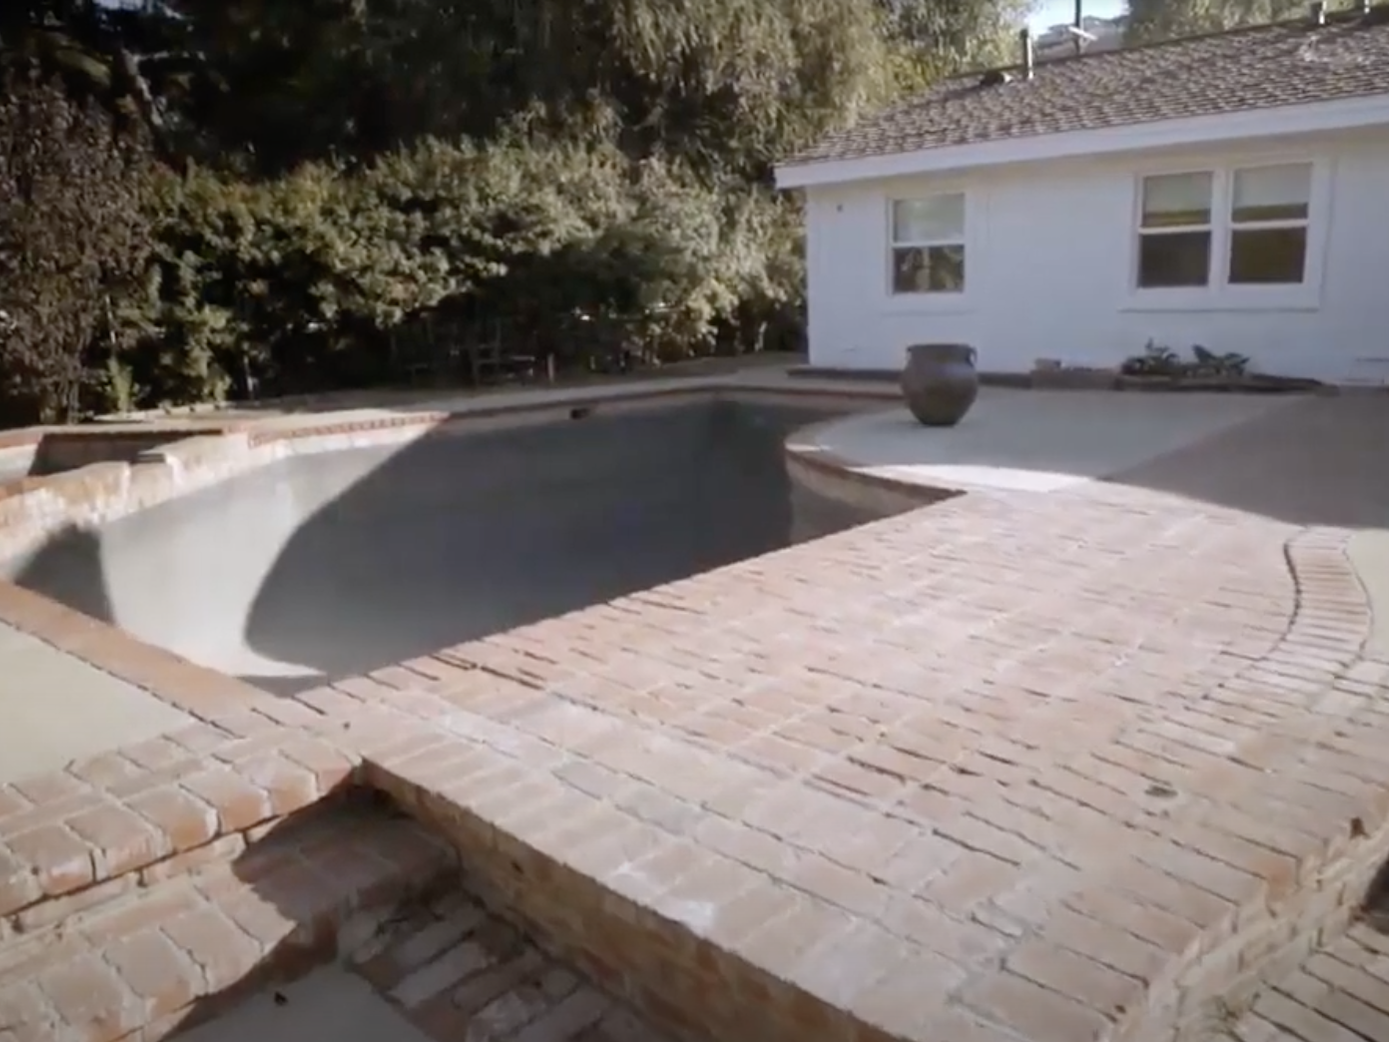 A concrete patio with an empty pool.